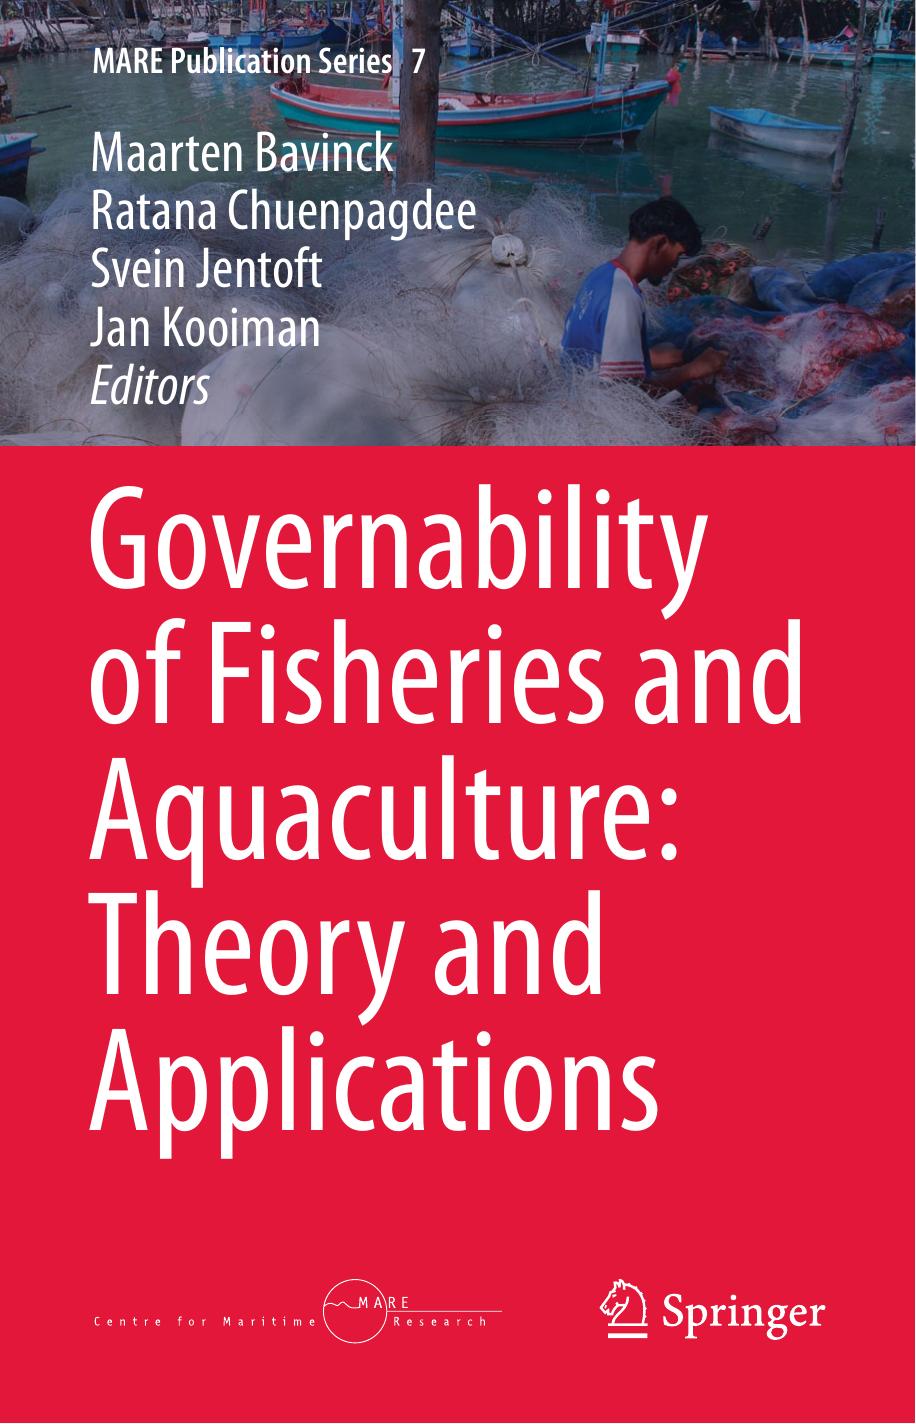 Governability of Fisheries 2013